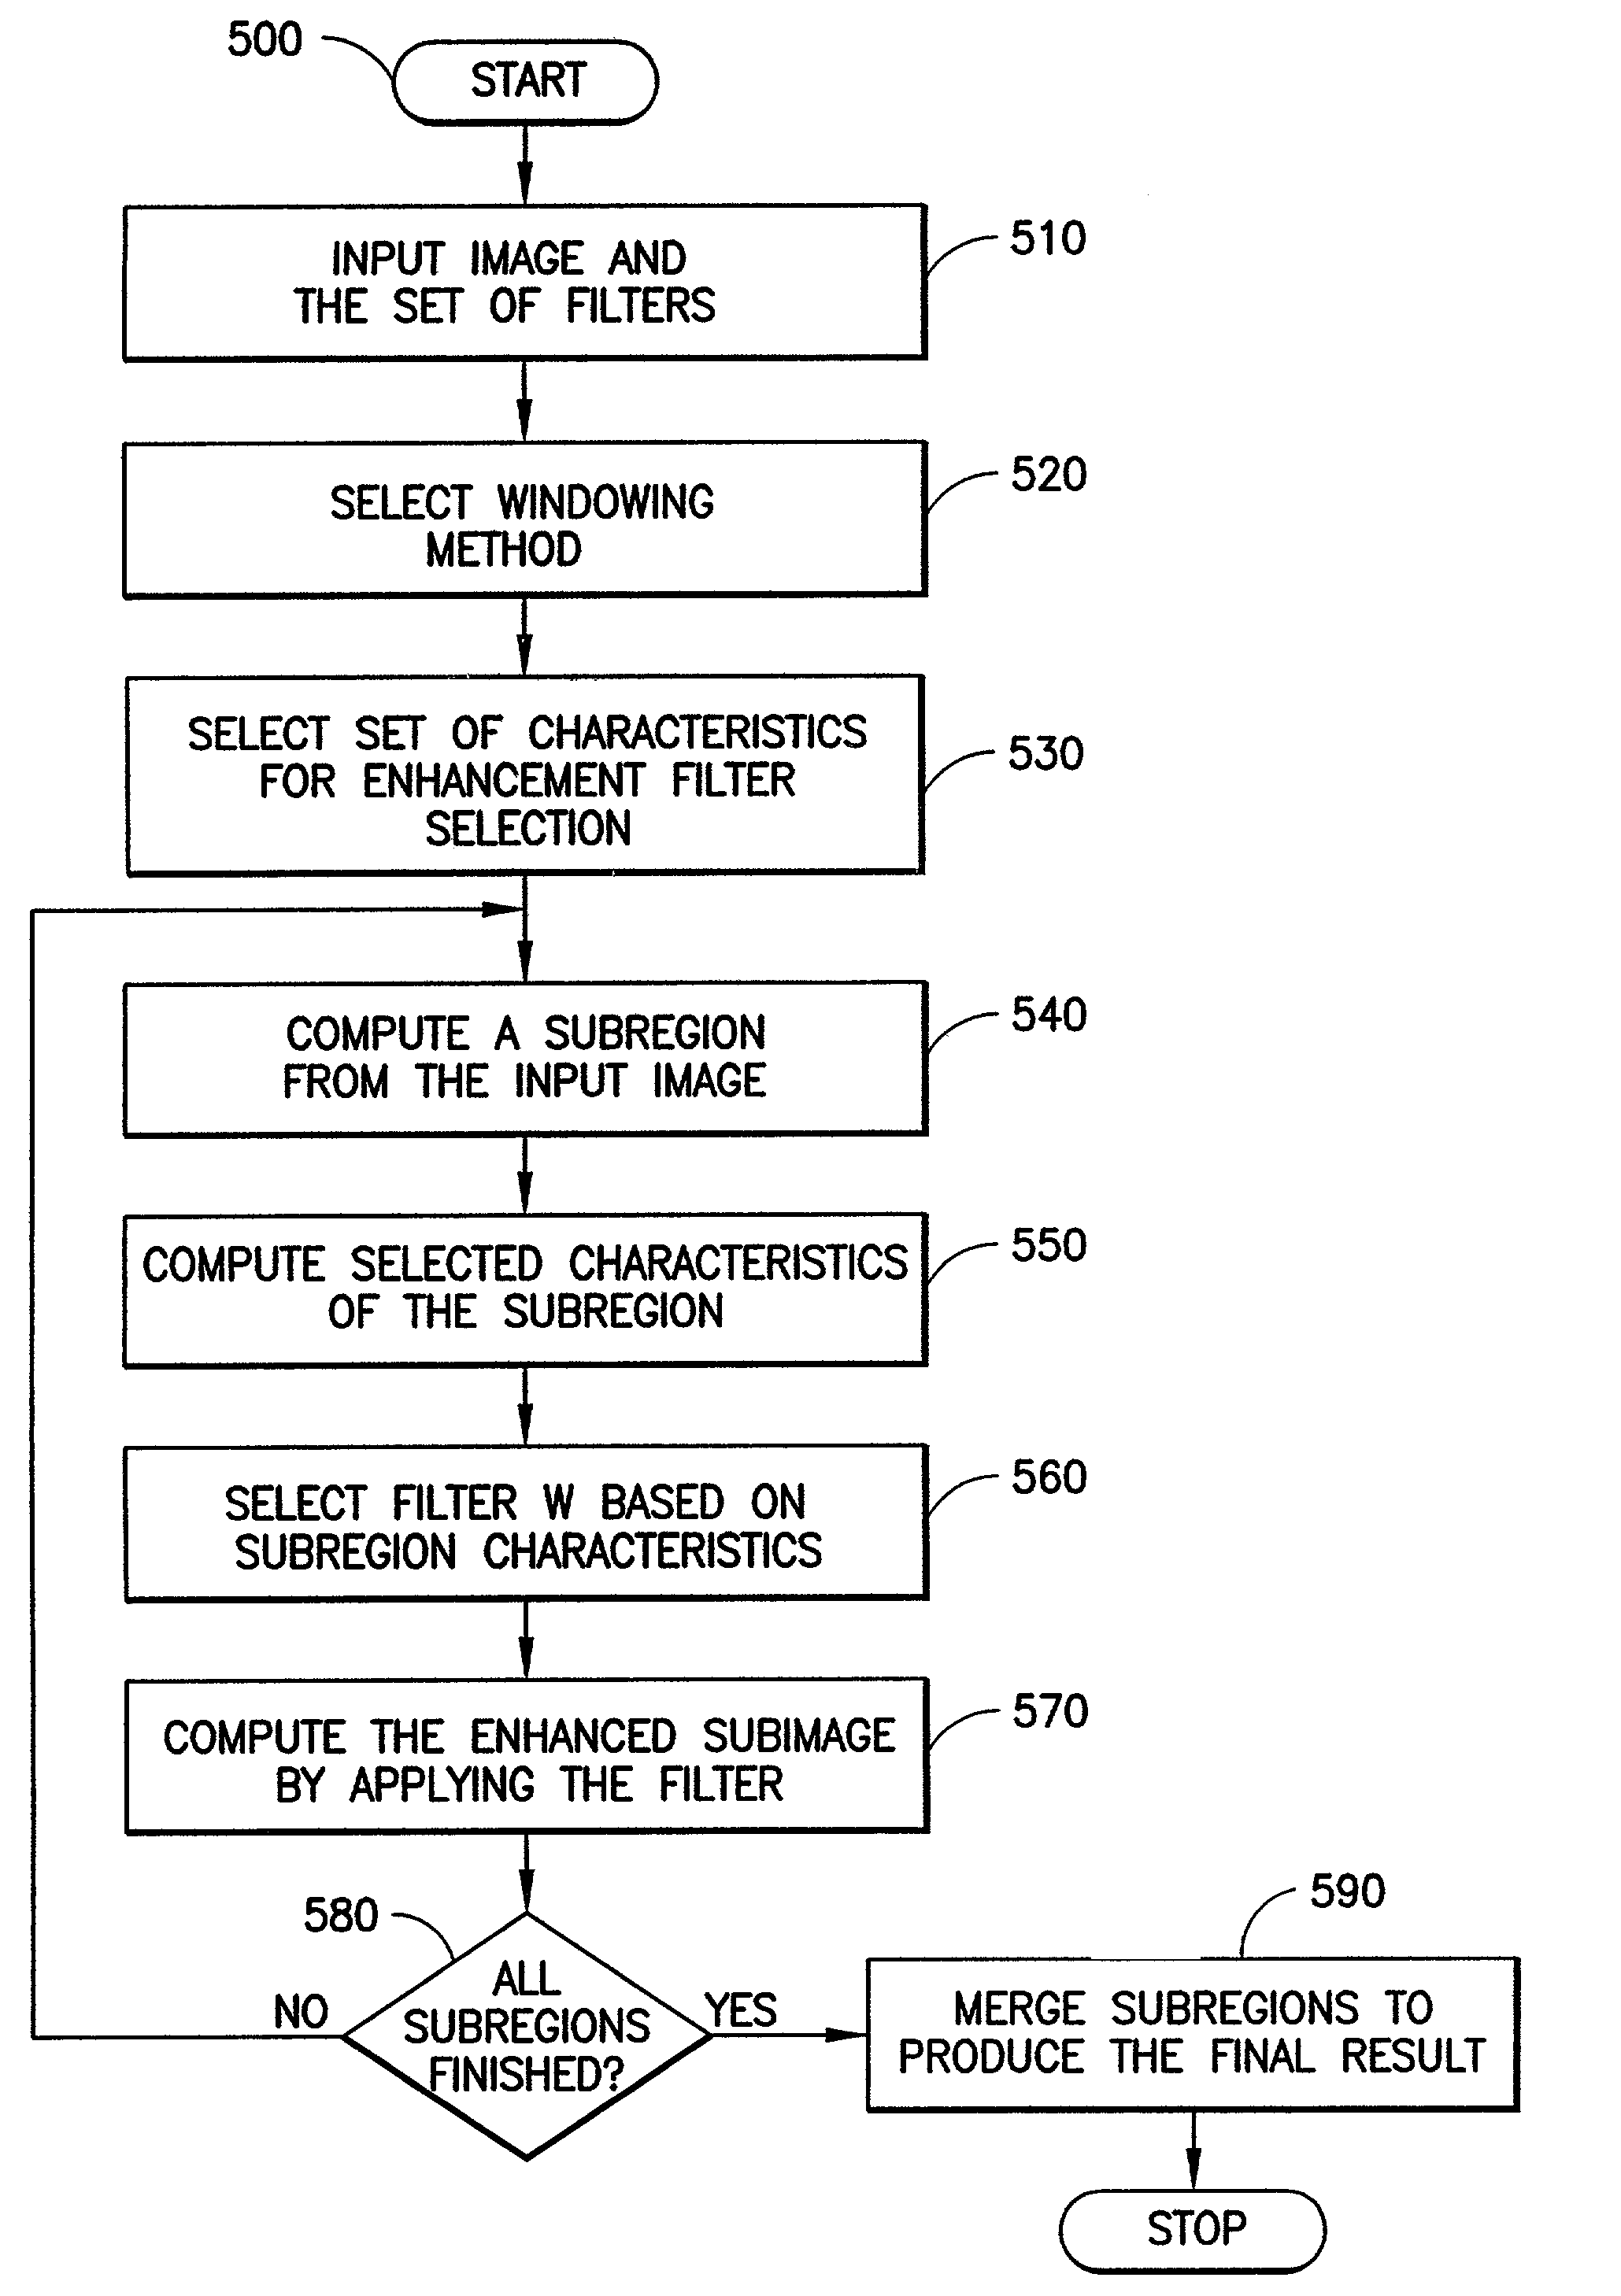 System and method for fingerprint image enhancement using partitioned least-squared filters